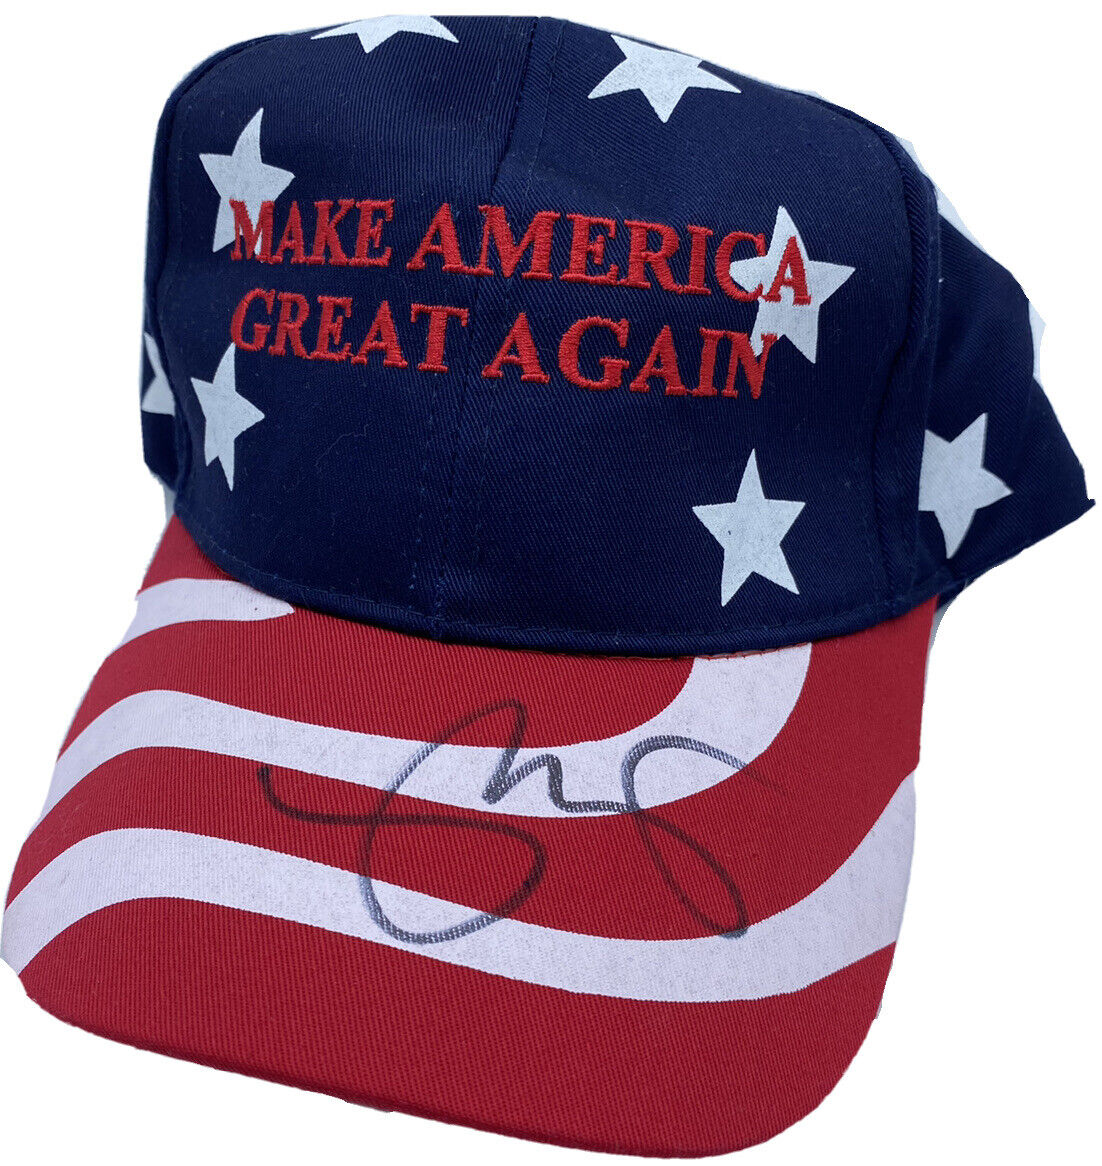 MIKE PENCE SIGNED AUTOGRAPHED KEEP AMERICA GREAT AGAIN HAT DONALD TRUMP VP JSA *